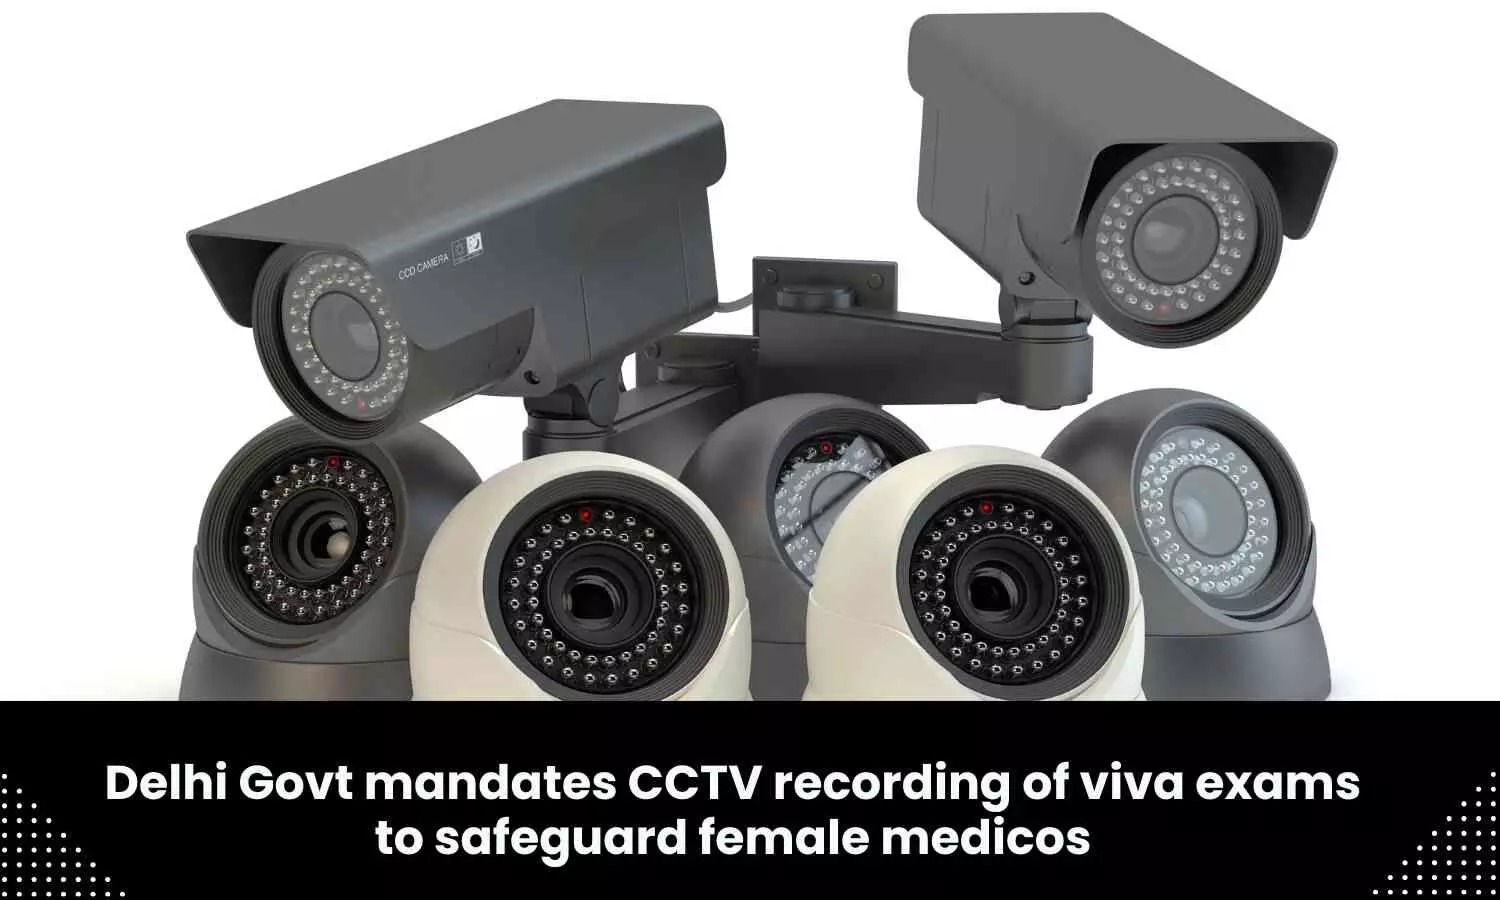 Ensure CCTV cameras installed are functional at all times: Delhi Govt directs its hospitals, medical colleges on female students safety